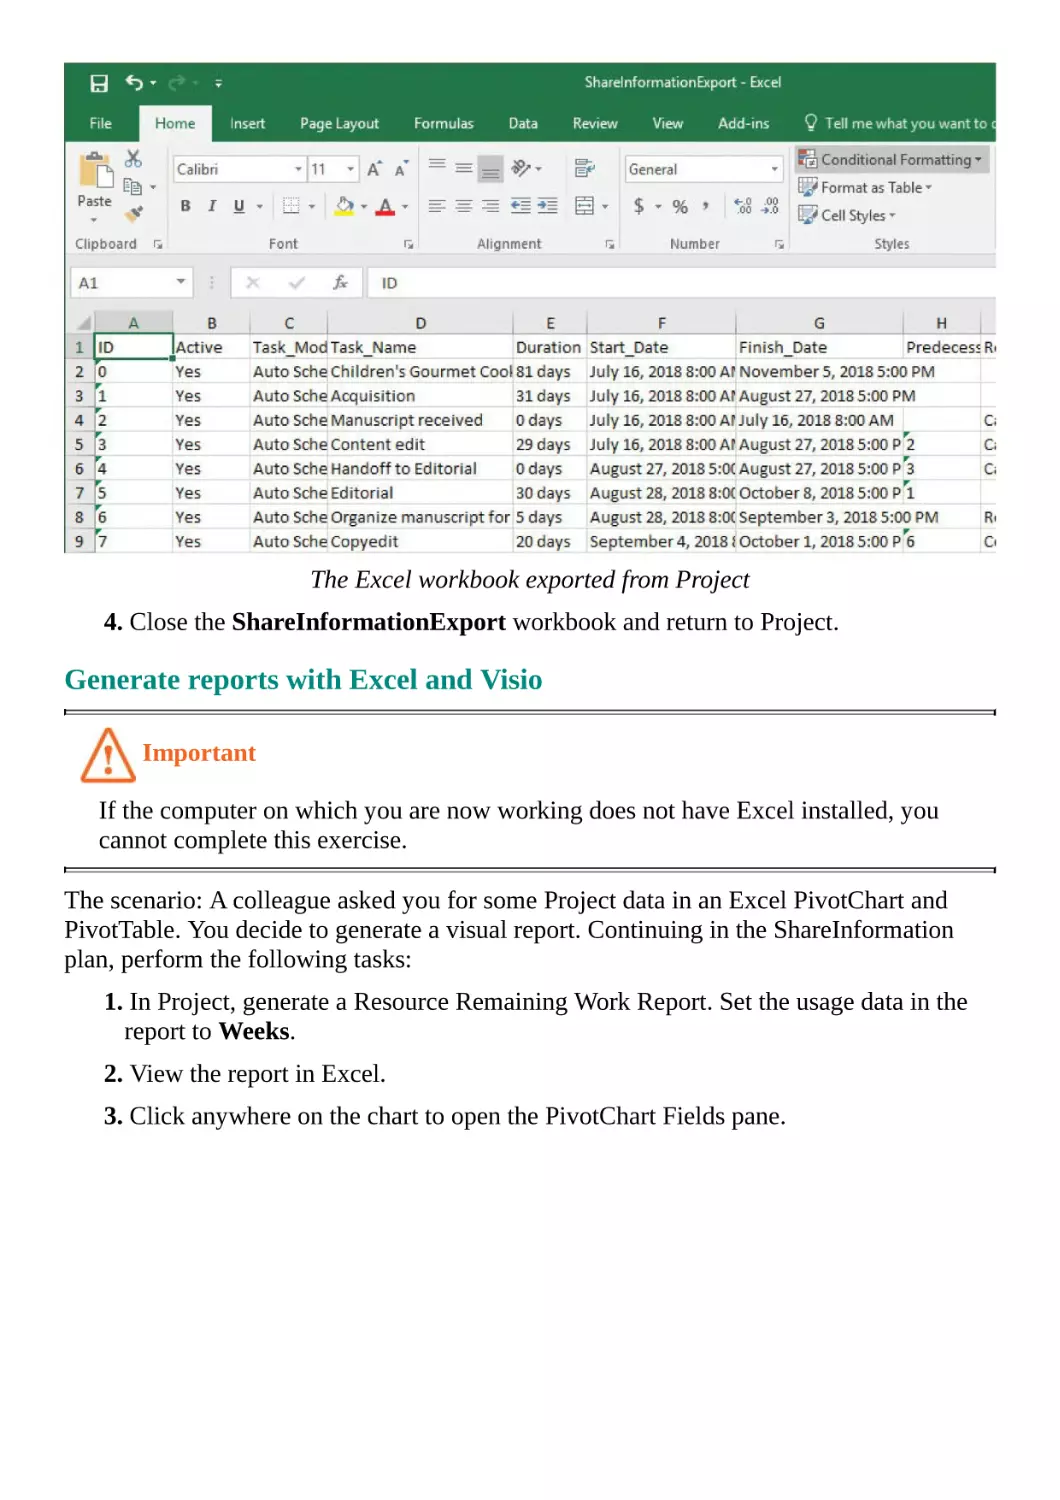 Generate reports with Excel and Visio